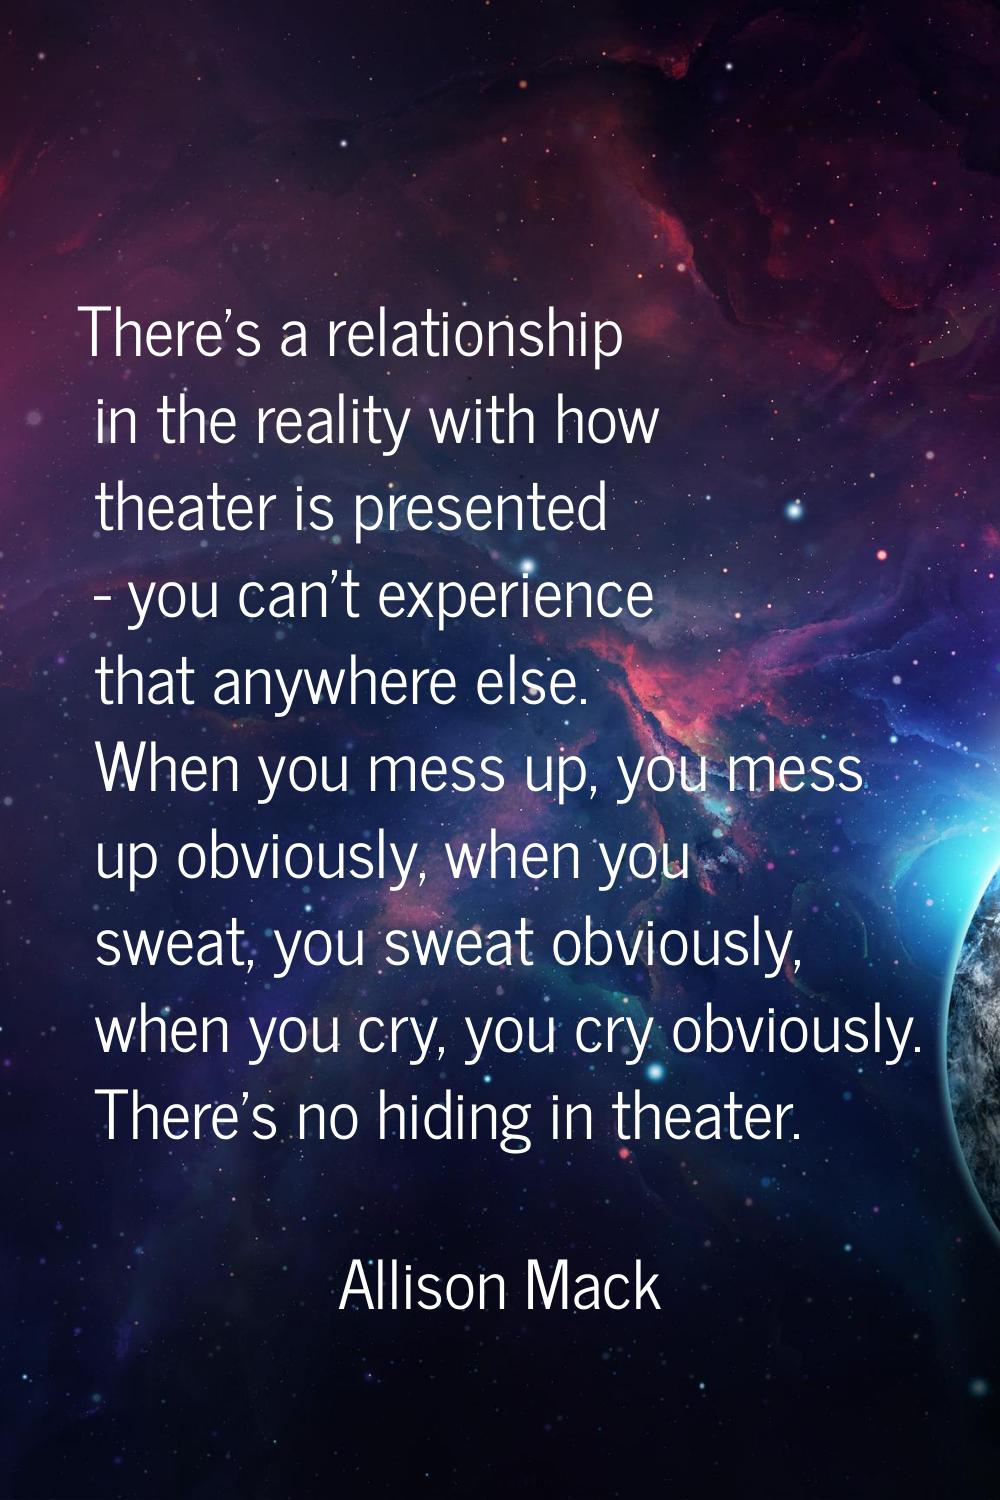 There's a relationship in the reality with how theater is presented - you can't experience that any